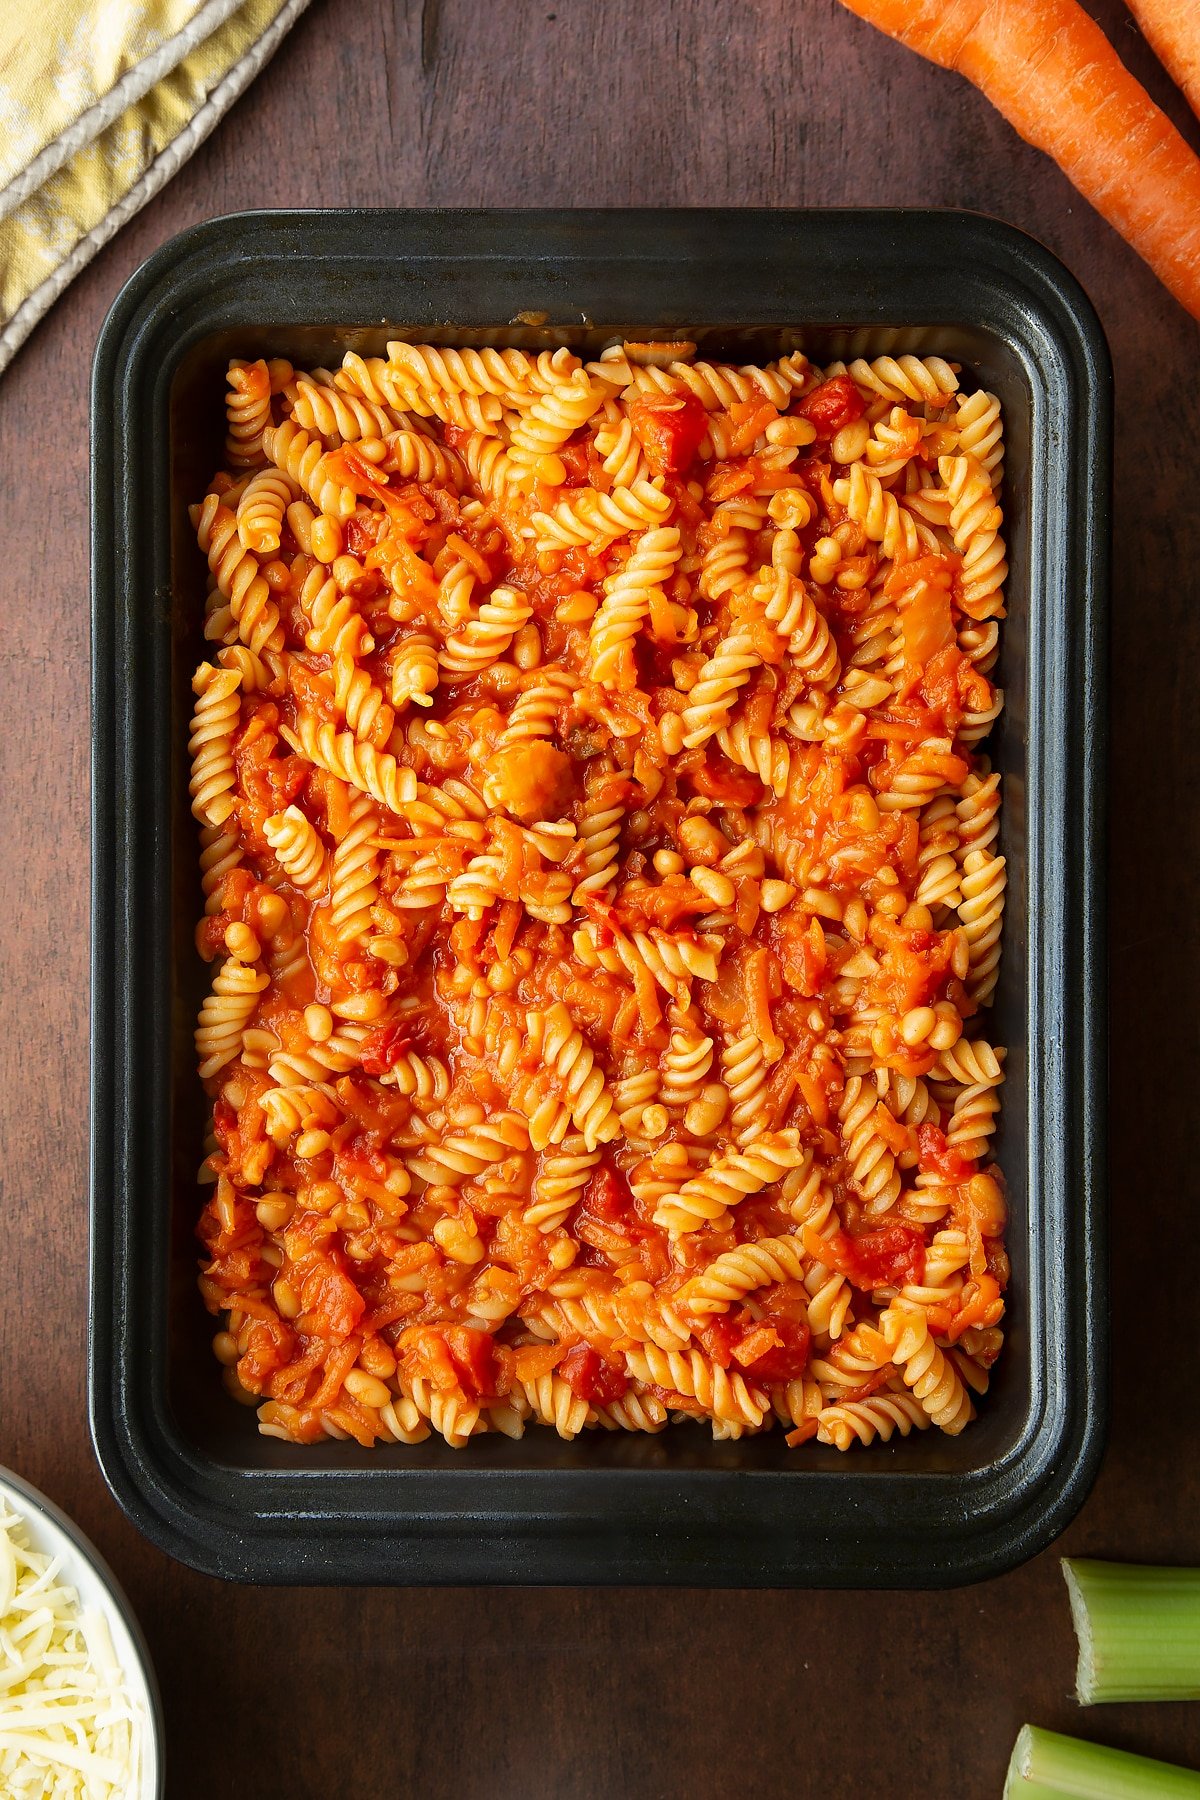 Baked beans and pasta in a tray. Ingredients to make pasta and baked beans surround the tray.